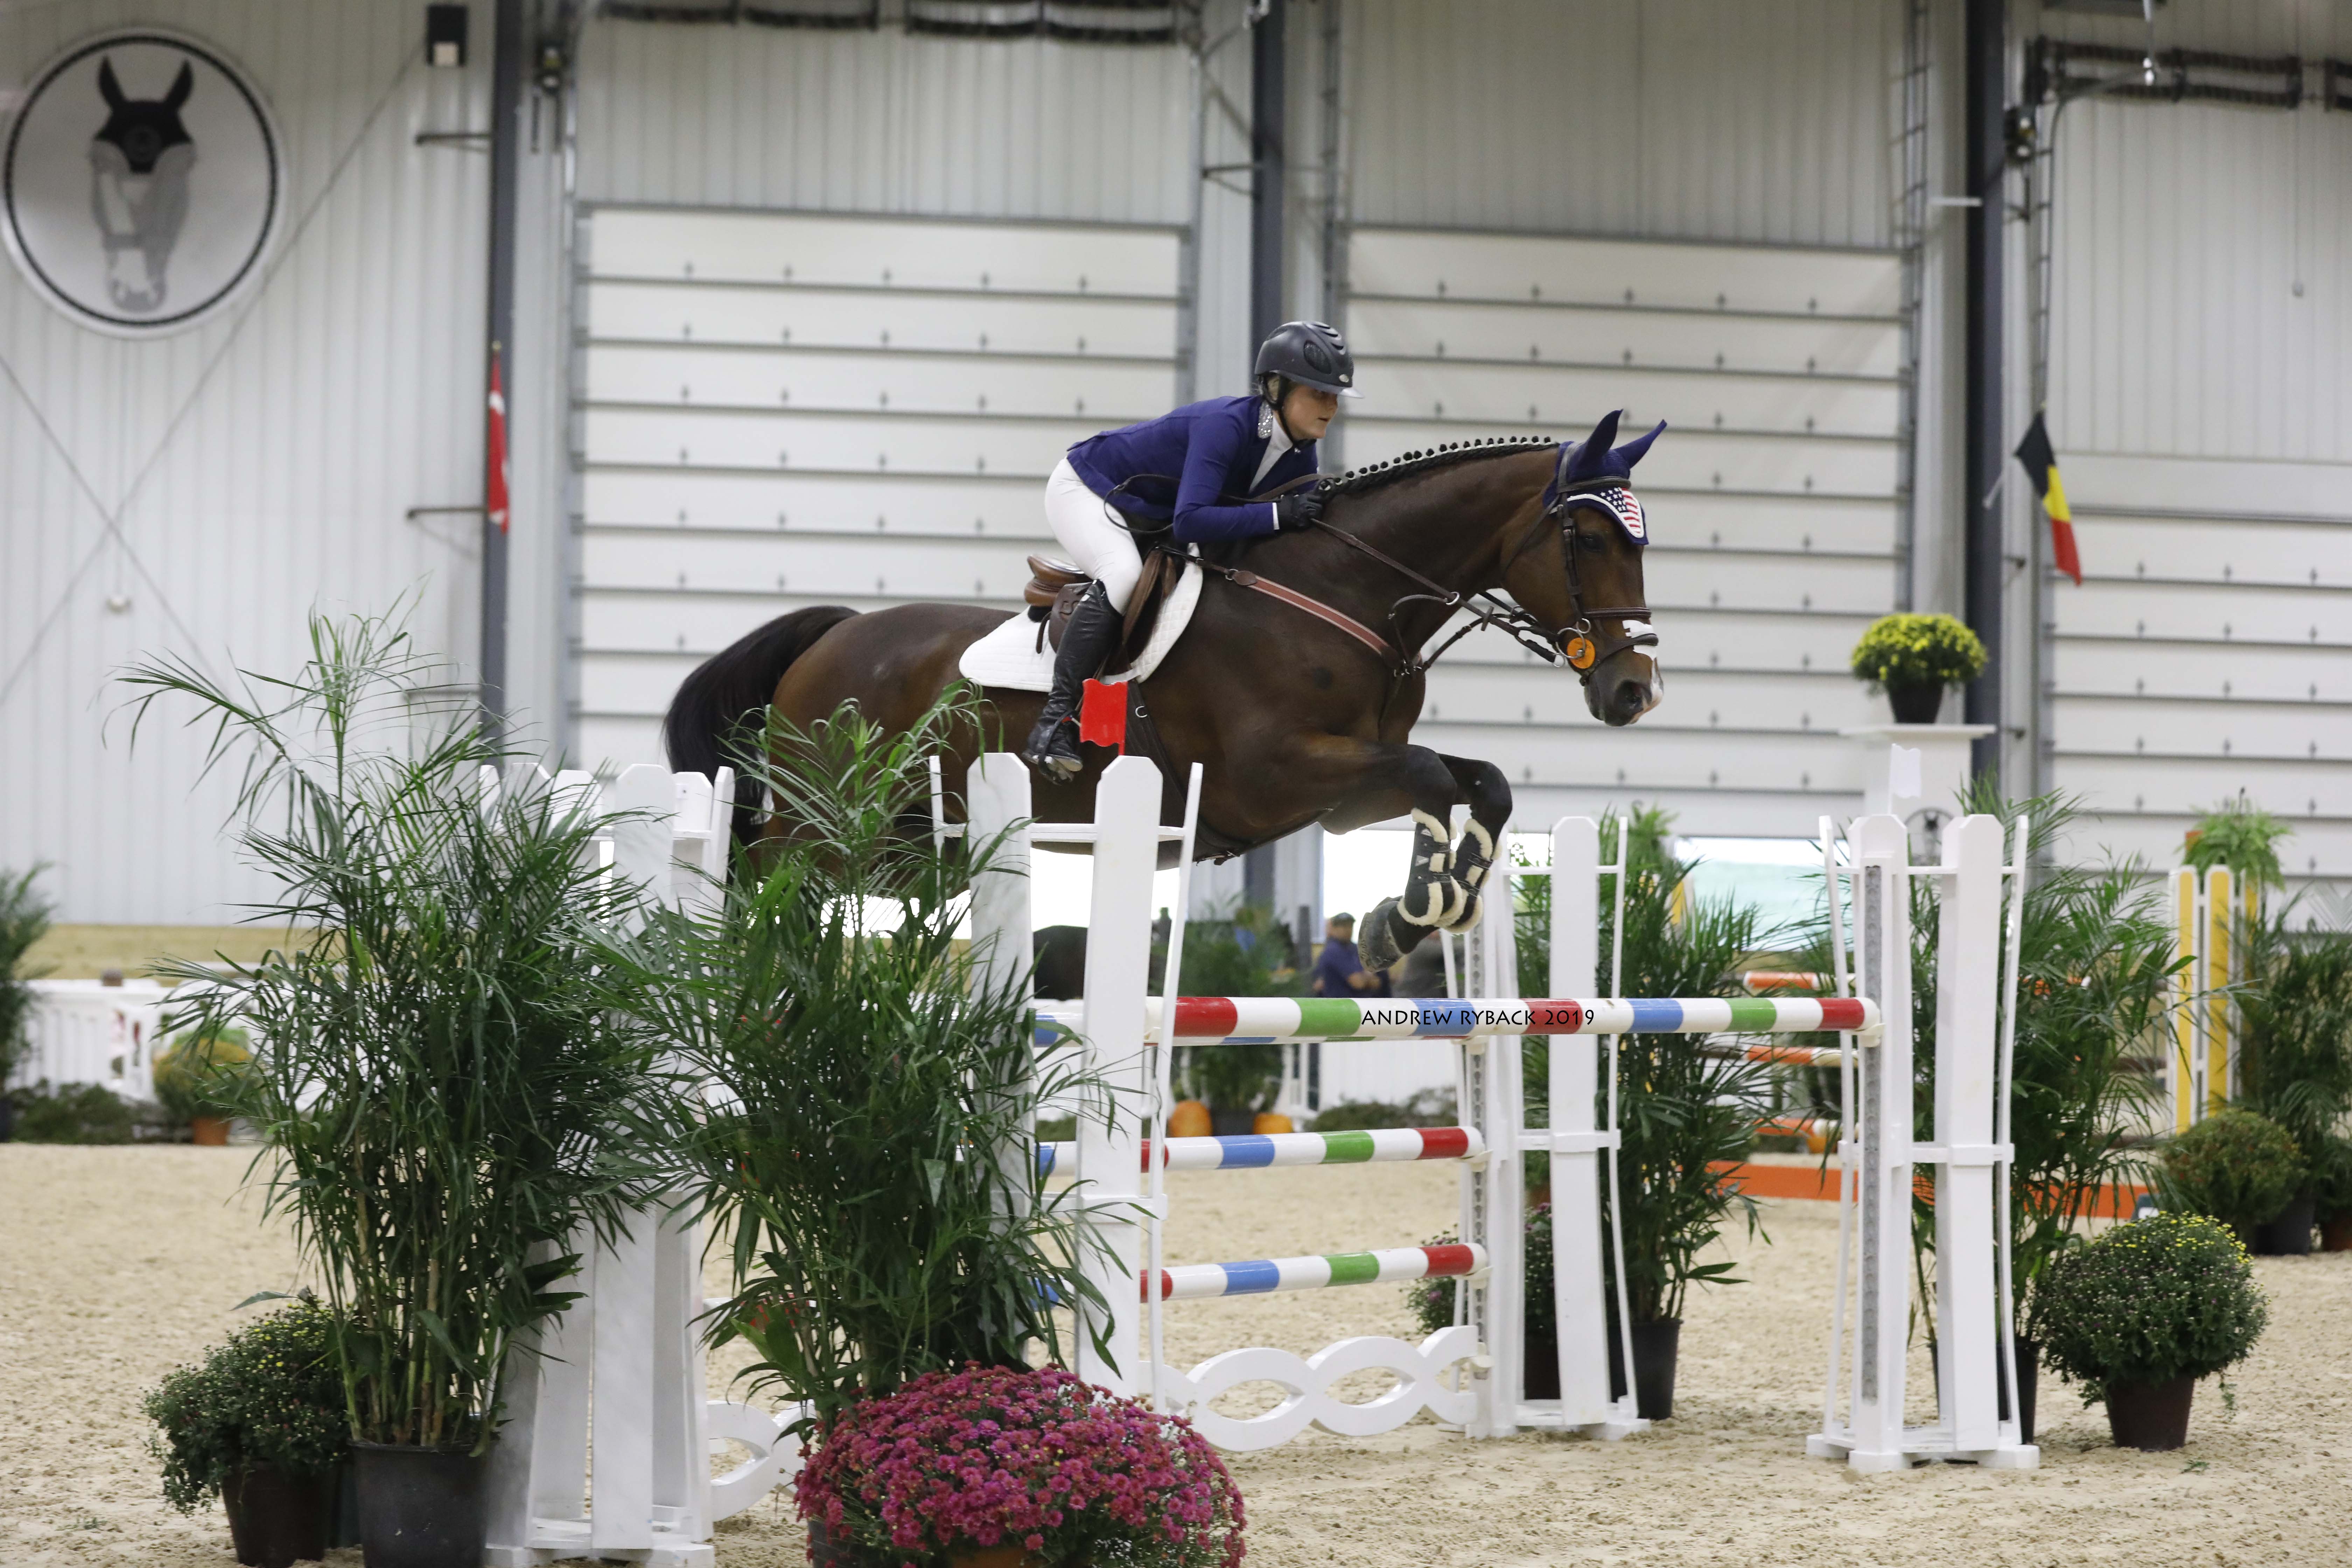 Keely McIntosh and So Live Helau Jump Out of Their Shoes and into a Grand Prix Win